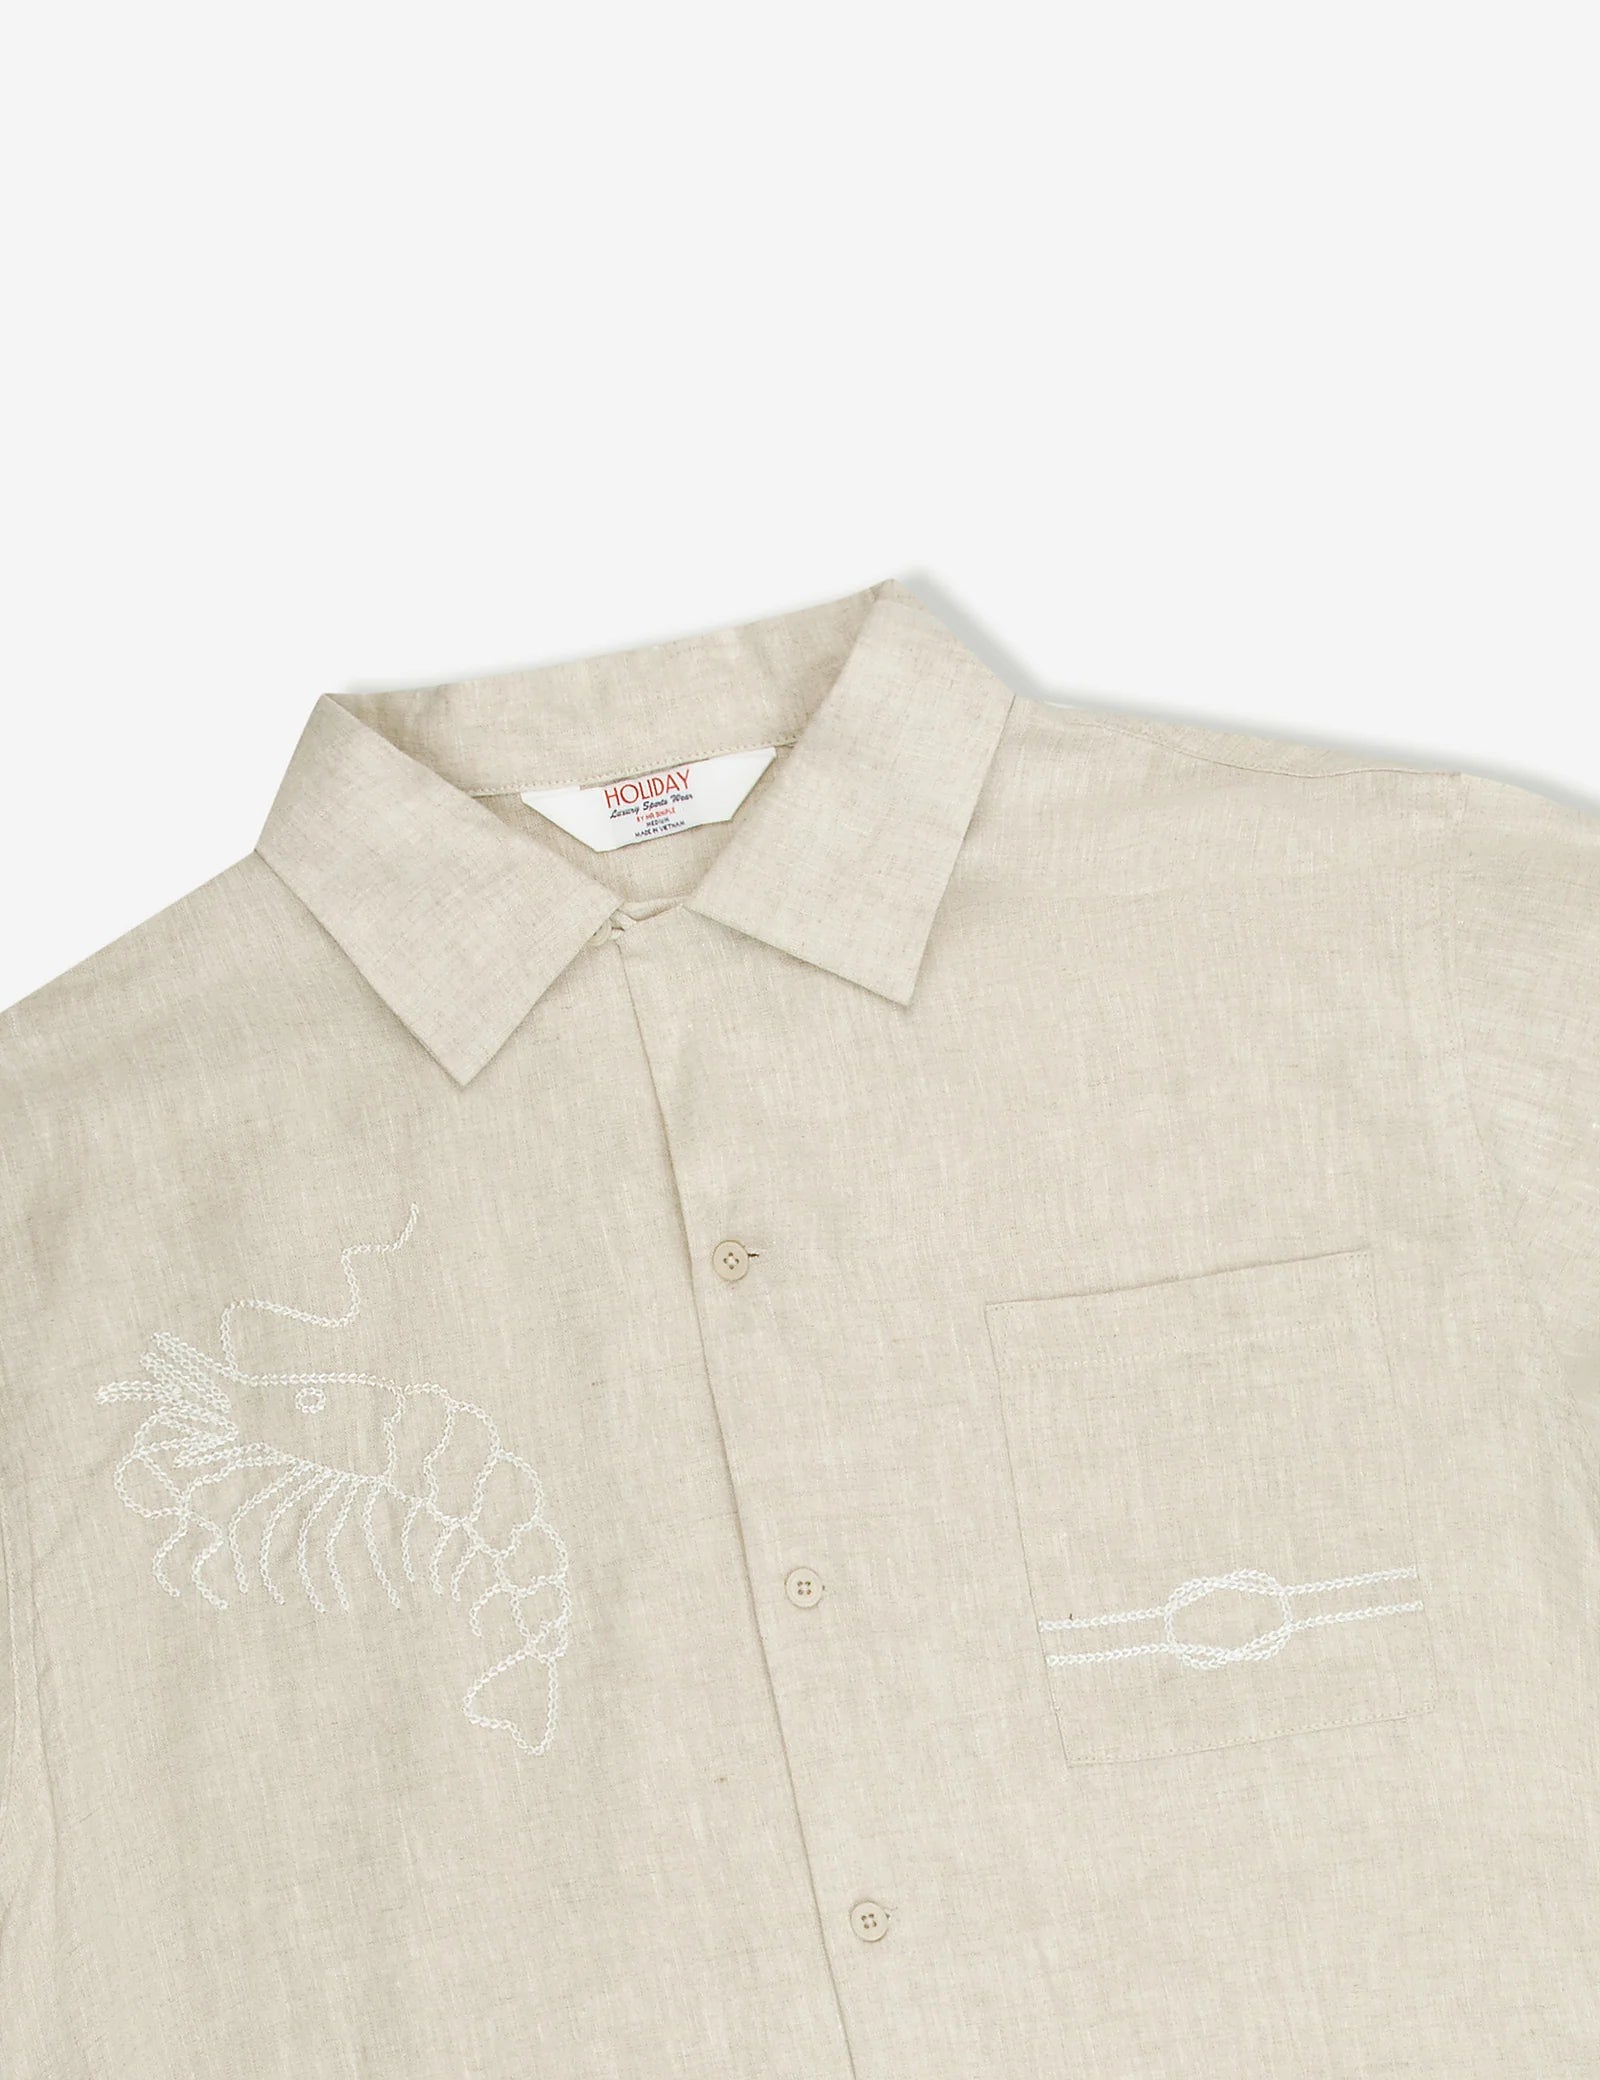 Huck Embroidered S/S Shirt - Natural